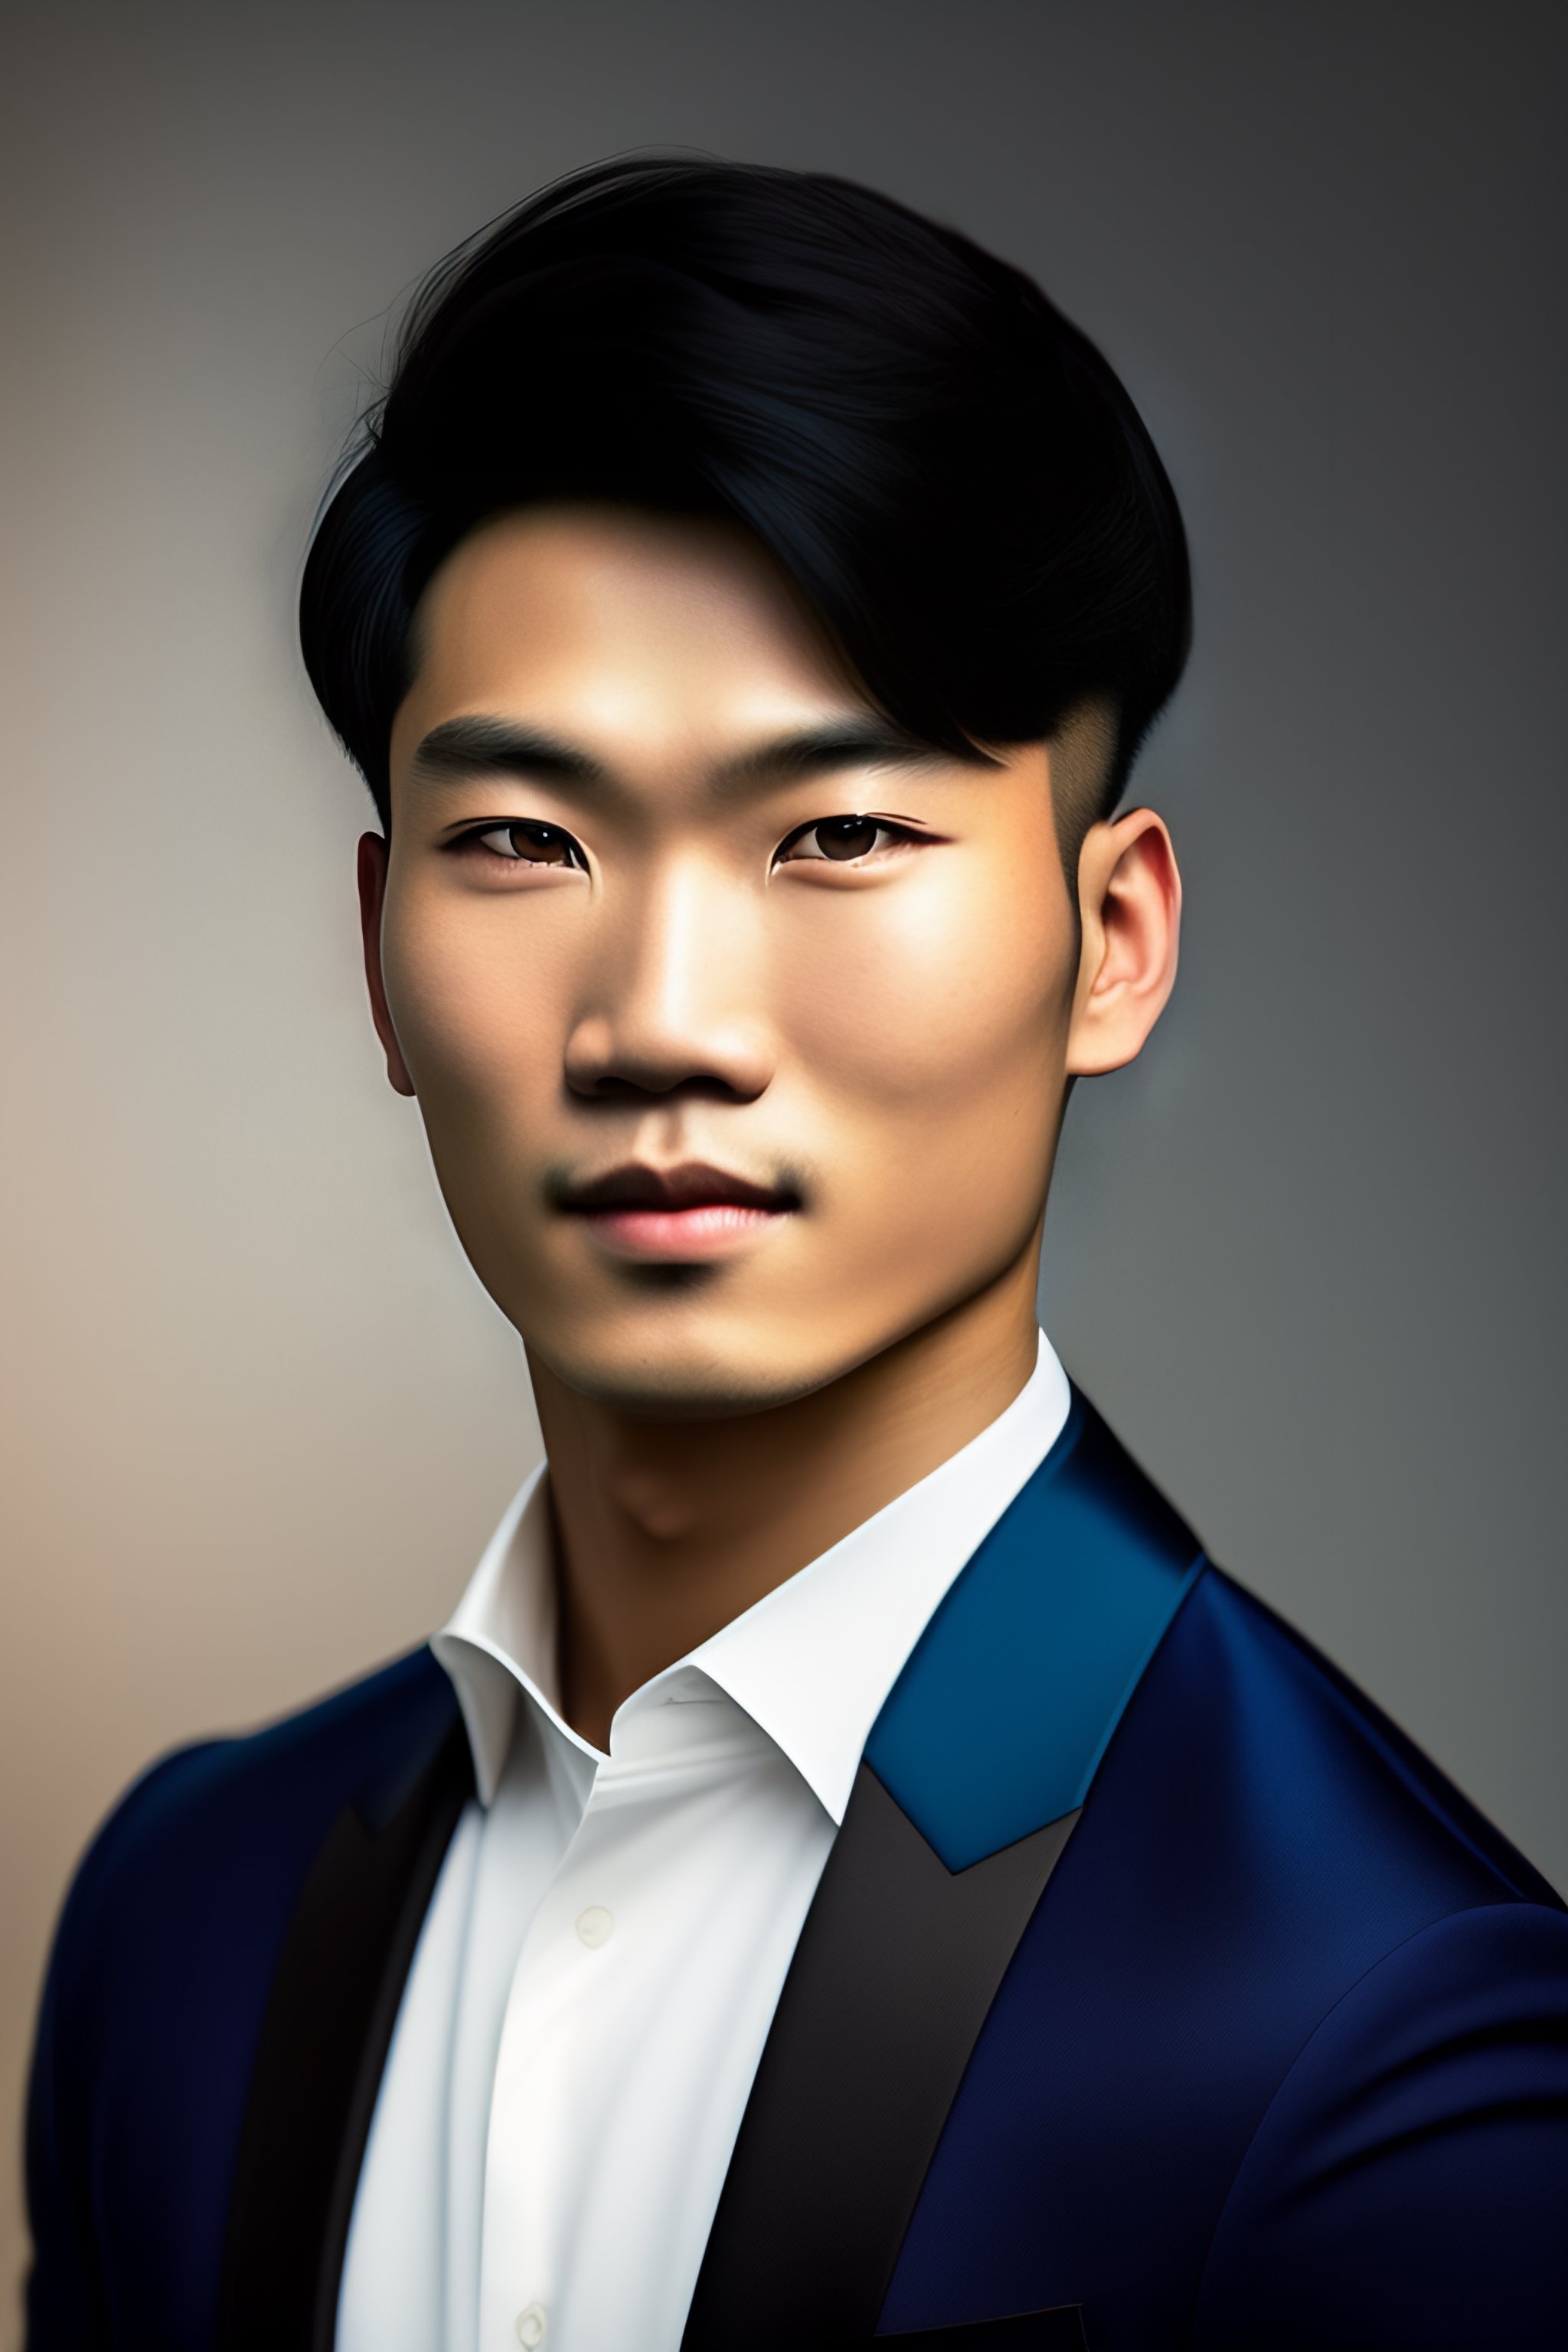 Portrait Of A Young Handsome Asian Man With Blue Eyes And Dark